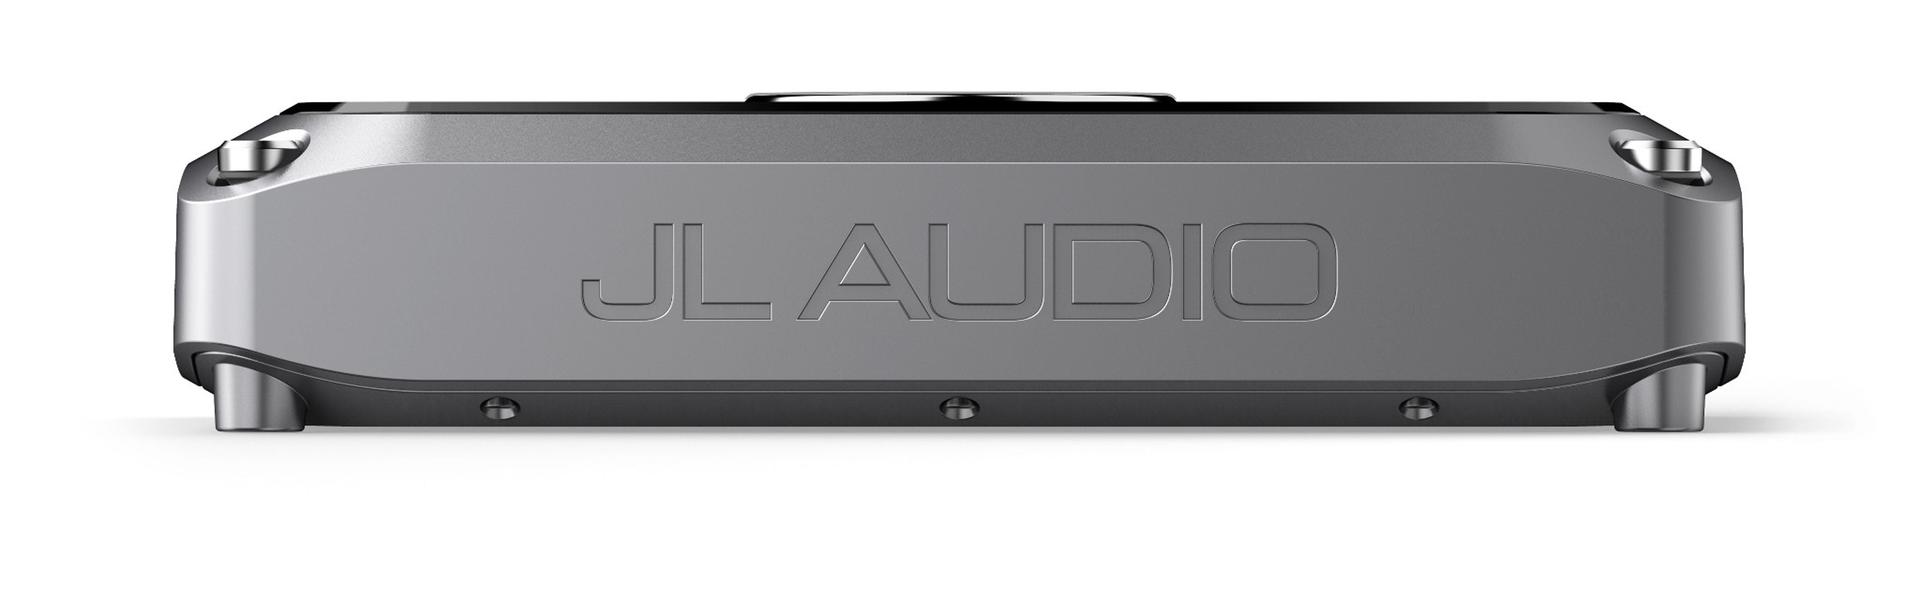 JL Audio VX600/6i 6-channel car amplifier with digital signal processing  75 watts RMS x 6